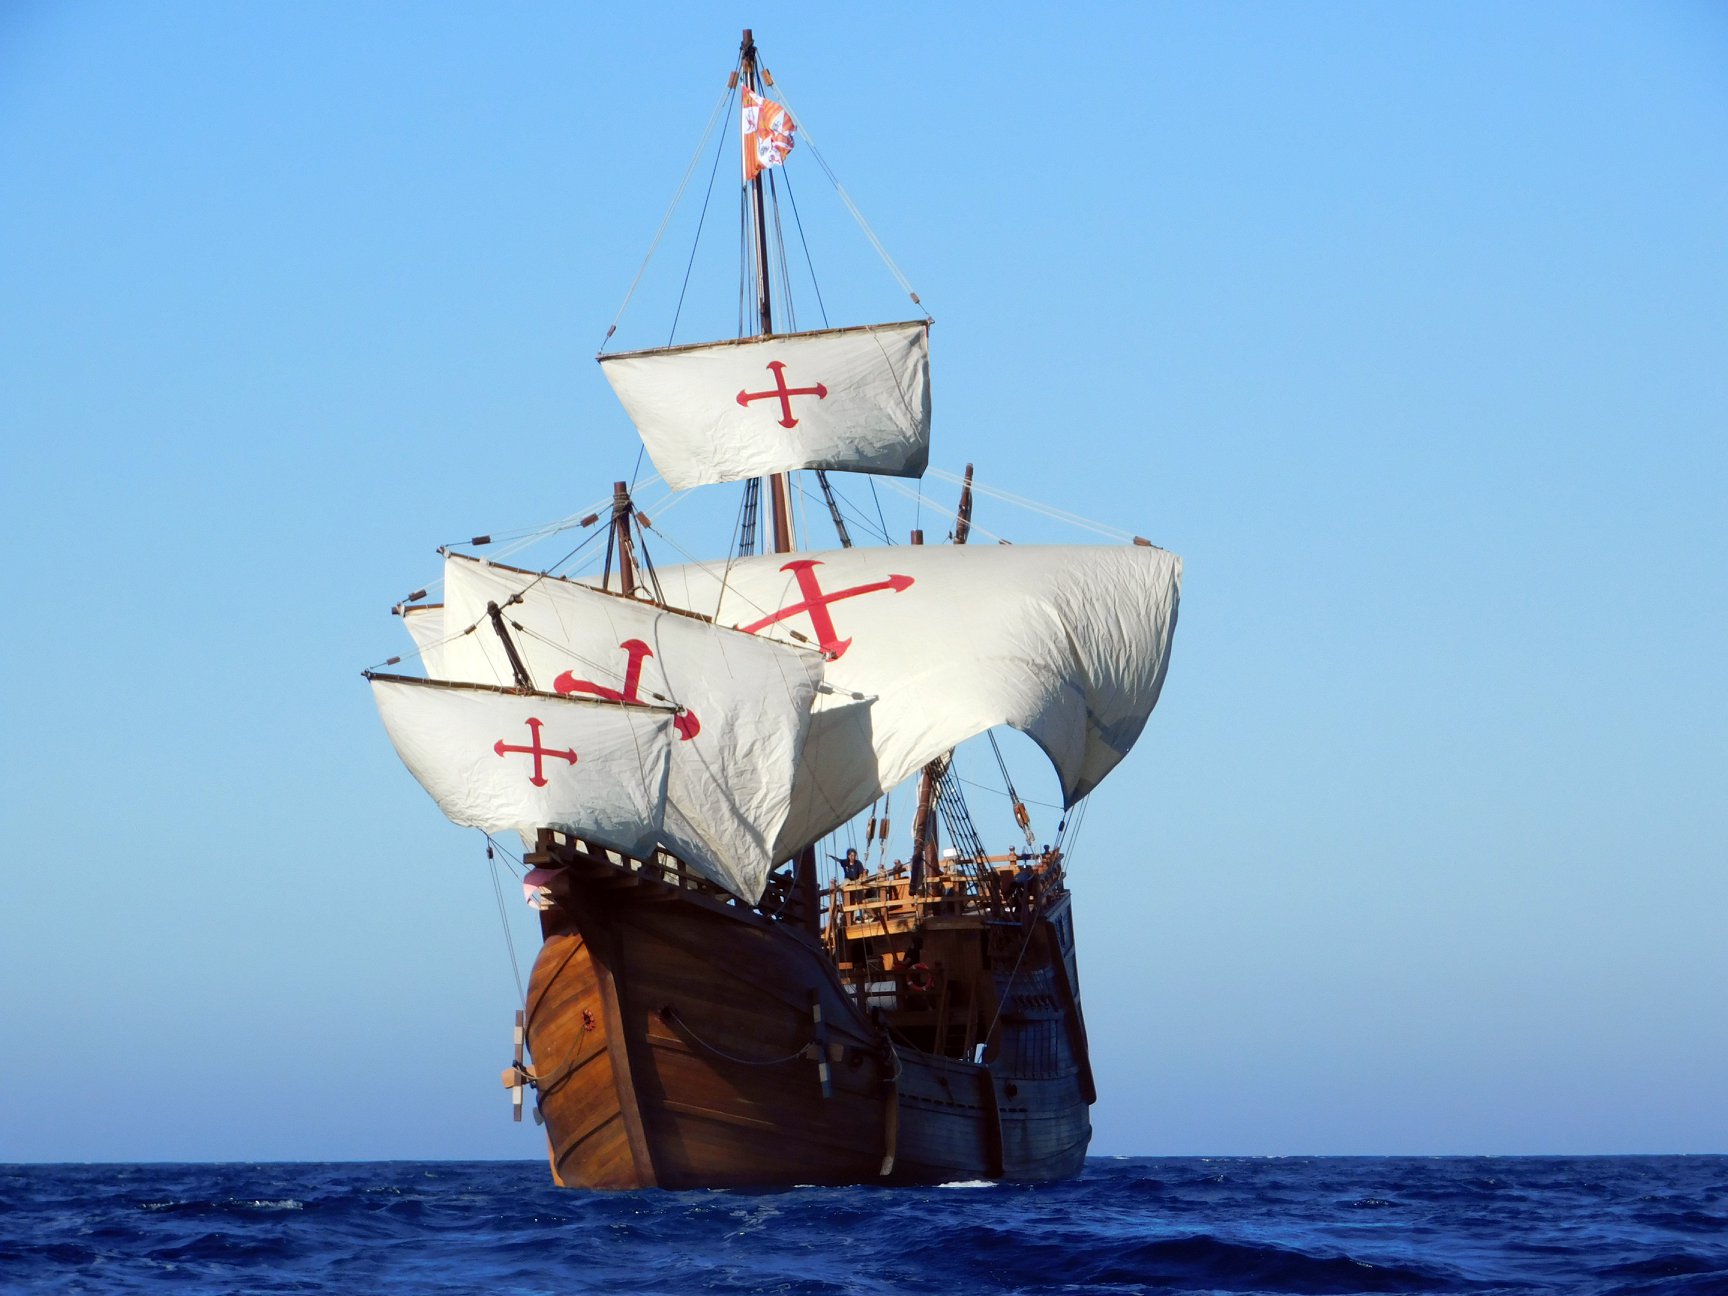 The Nao Santa María is one of the most famous ships known to man. 